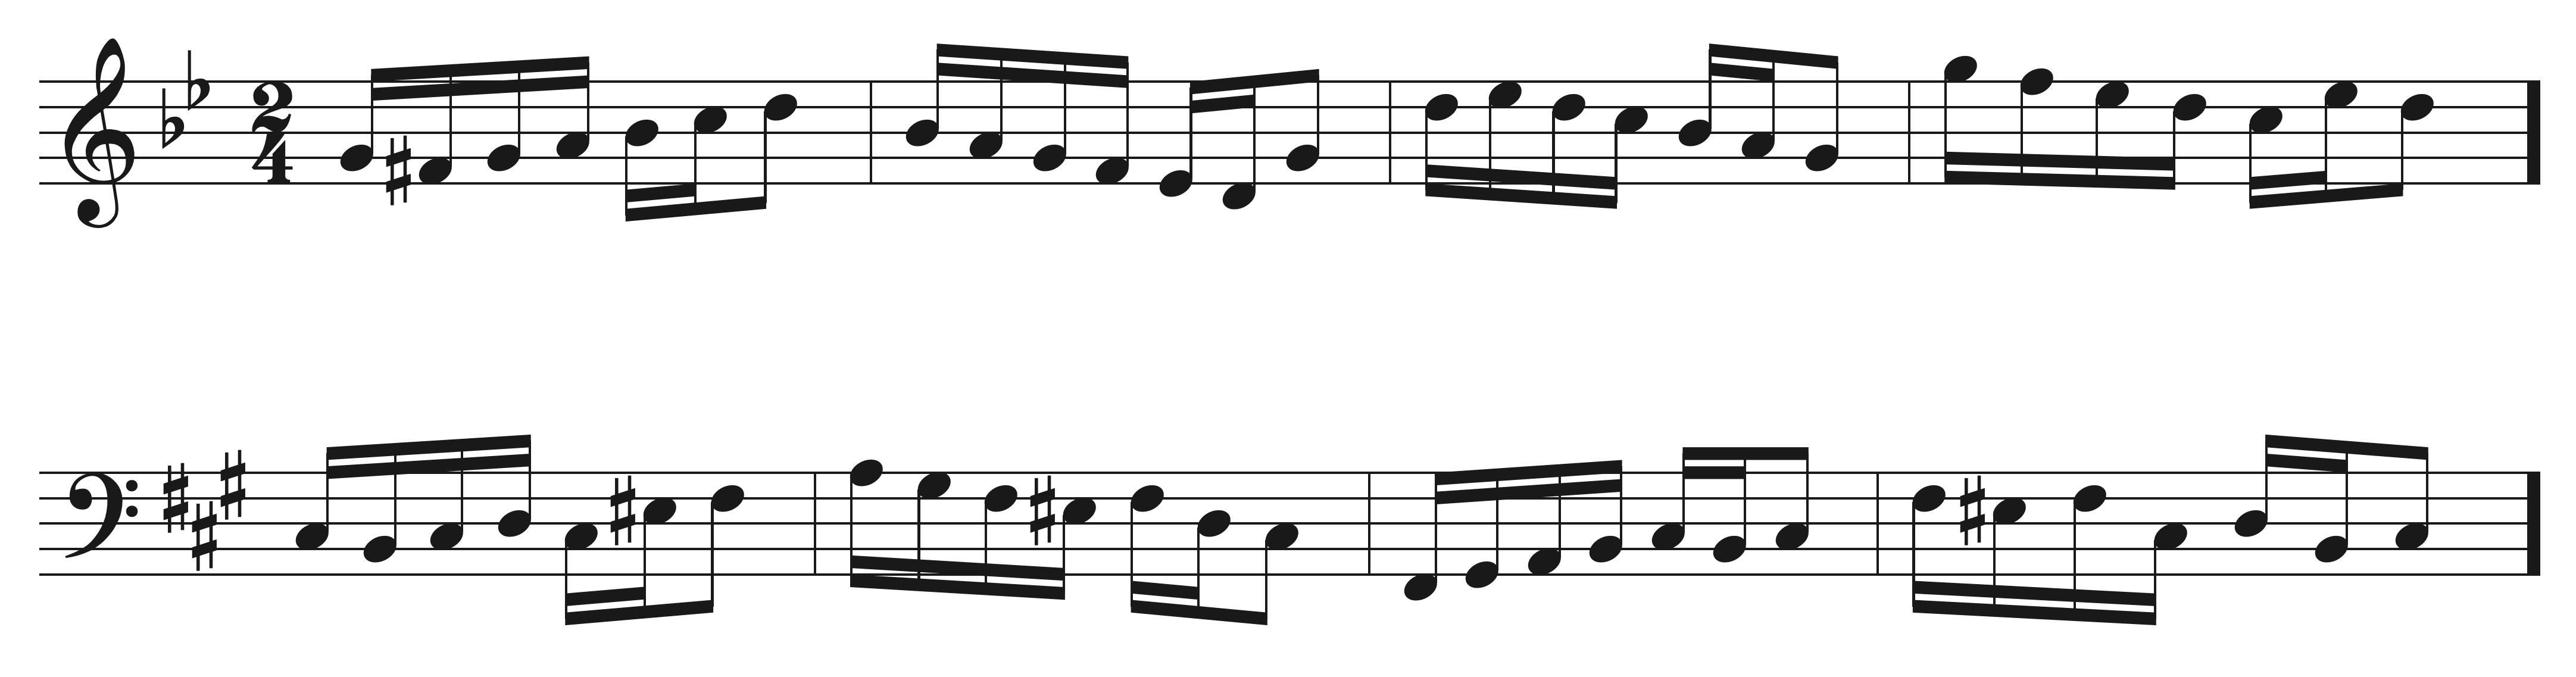 Minor Scale Sight Singing exercise example